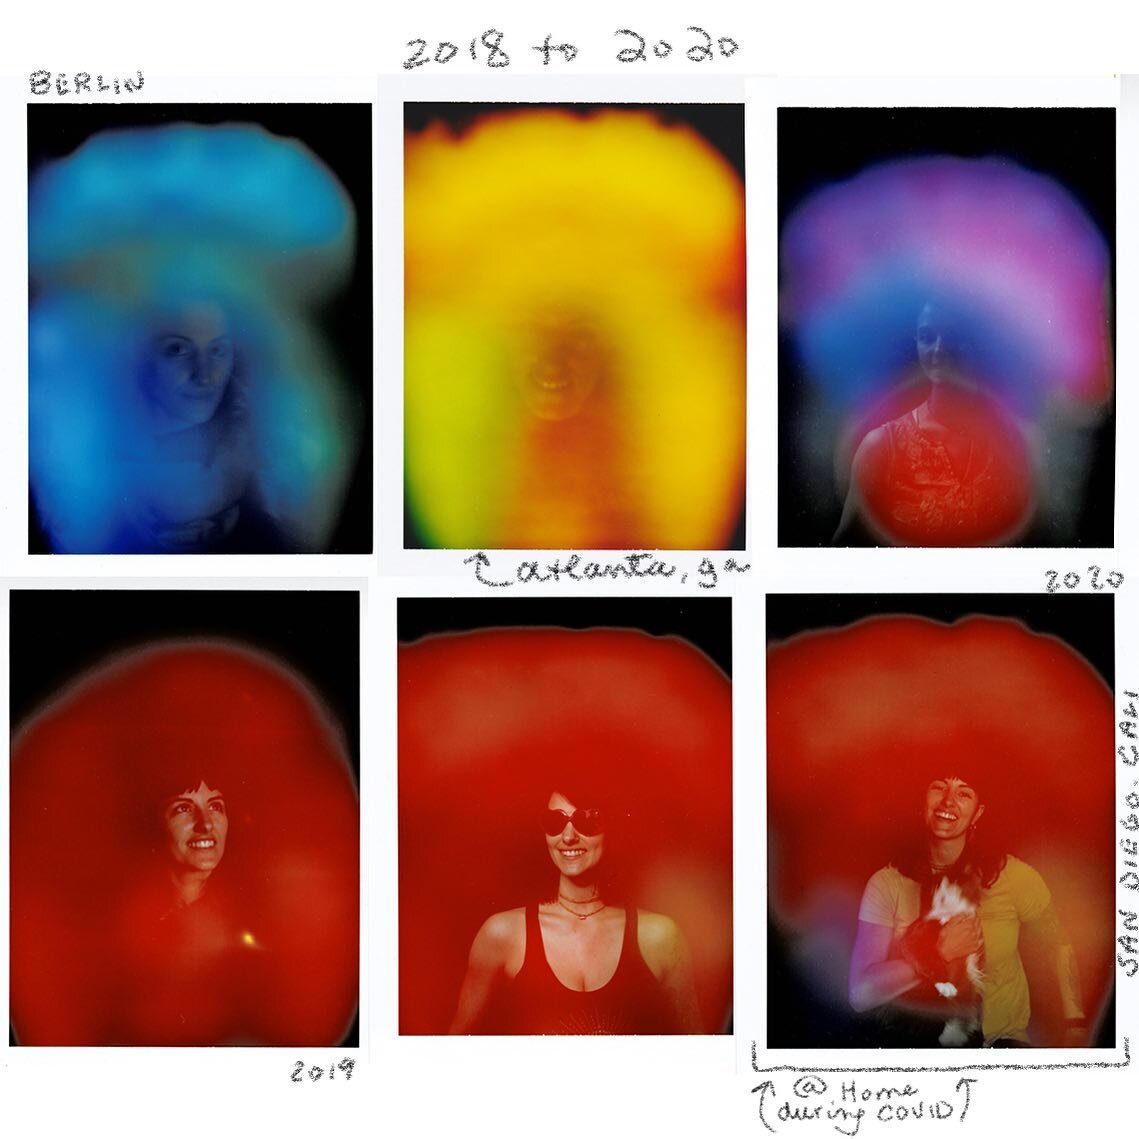 One of my artistic hobbies is having my aura photographed. It started in 2014 when my partner and I went to LA and I had a digital photo of my aura taken at a shop in Santa Monica. Since then, it&rsquo;s become something I do regularly to see how I c